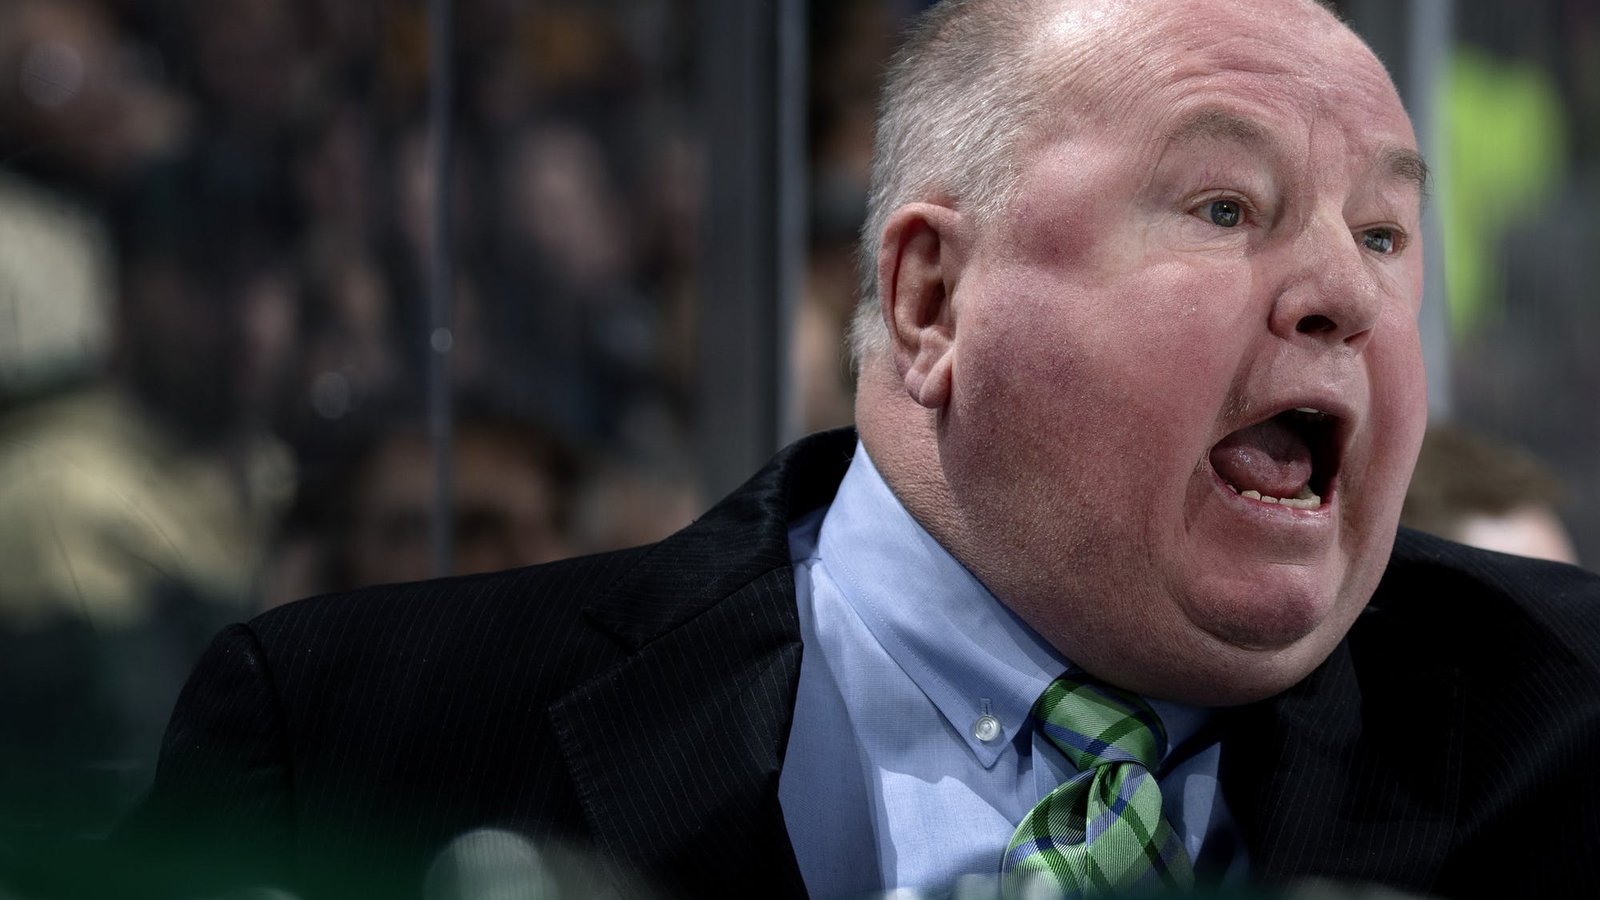 Boudreau flipped out and sequestered himself after firing! 